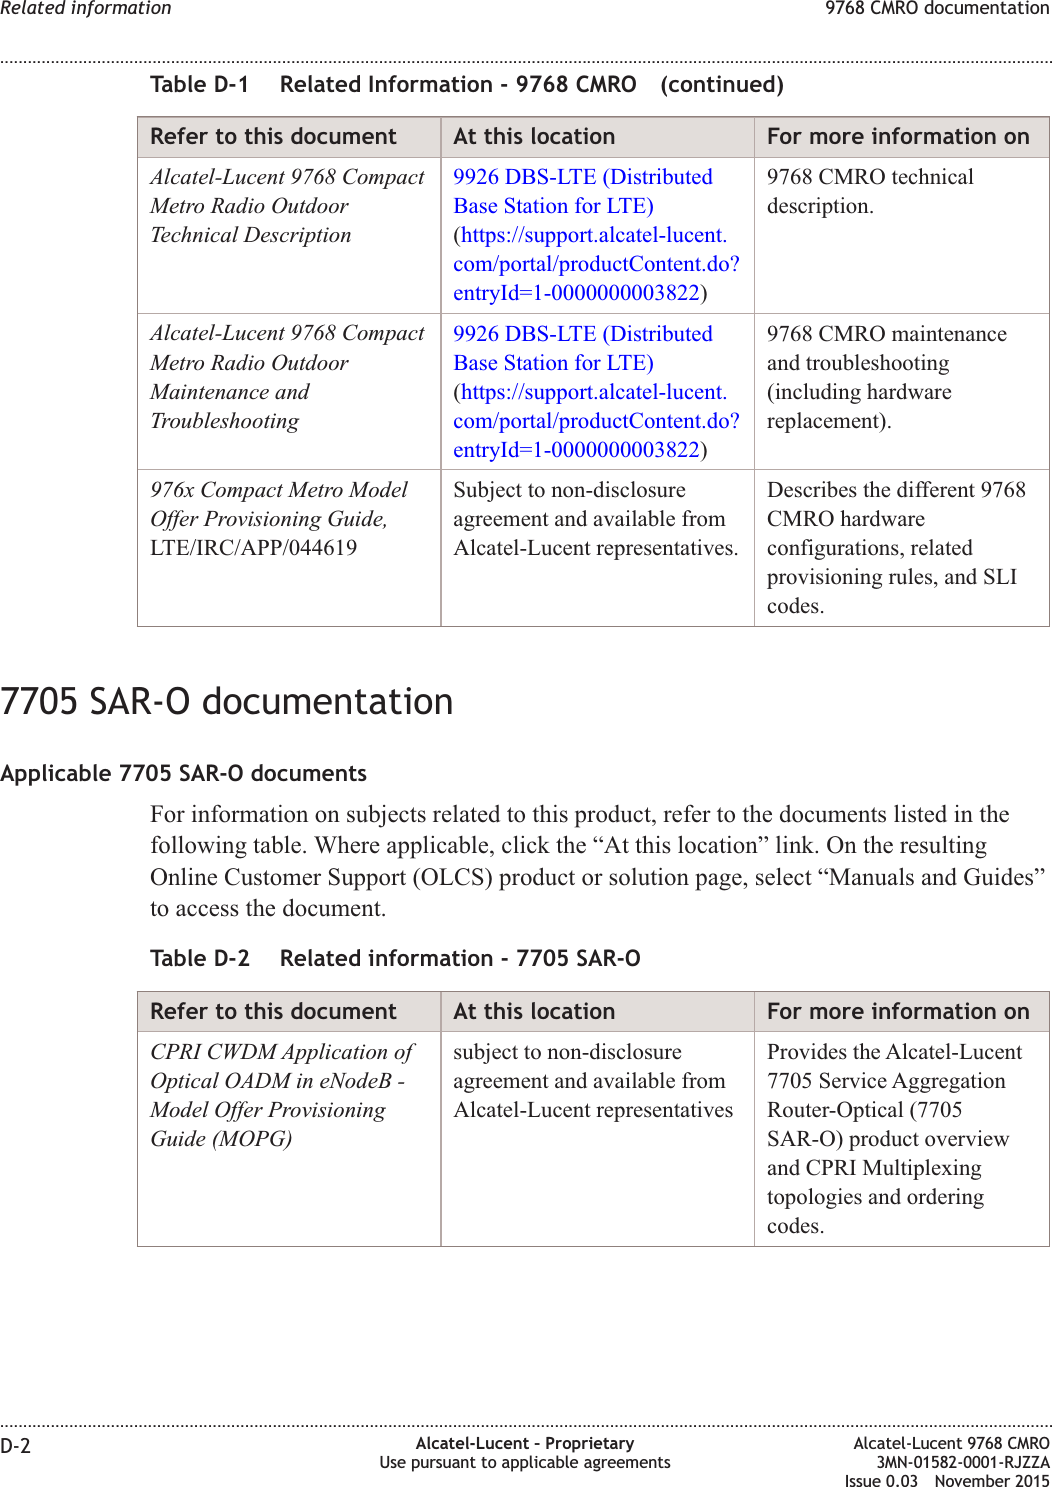 Table D-1 Related Information - 9768 CMRO (continued)Refer to this document At this location For more information onAlcatel-Lucent 9768 CompactMetro Radio OutdoorTechnical Description9926 DBS-LTE (DistributedBase Station for LTE)(https://support.alcatel-lucent.com/portal/productContent.do?entryId=1-0000000003822)9768 CMRO technicaldescription.Alcatel-Lucent 9768 CompactMetro Radio OutdoorMaintenance andTroubleshooting9926 DBS-LTE (DistributedBase Station for LTE)(https://support.alcatel-lucent.com/portal/productContent.do?entryId=1-0000000003822)9768 CMRO maintenanceand troubleshooting(including hardwarereplacement).976x Compact Metro ModelOffer Provisioning Guide,LTE/IRC/APP/044619Subject to non-disclosureagreement and available fromAlcatel-Lucent representatives.Describes the different 9768CMRO hardwareconfigurations, relatedprovisioning rules, and SLIcodes.7705 SAR-O documentationApplicable 7705 SAR-O documentsFor information on subjects related to this product, refer to the documents listed in thefollowing table. Where applicable, click the “At this location” link. On the resultingOnline Customer Support (OLCS) product or solution page, select “Manuals and Guides”to access the document.Table D-2 Related information - 7705 SAR-ORefer to this document At this location For more information onCPRI CWDM Application ofOptical OADM in eNodeB -Model Offer ProvisioningGuide (MOPG)subject to non-disclosureagreement and available fromAlcatel-Lucent representativesProvides the Alcatel-Lucent7705 Service AggregationRouter-Optical (7705SAR-O) product overviewand CPRI Multiplexingtopologies and orderingcodes.Related information 9768 CMRO documentation........................................................................................................................................................................................................................................................................................................................................................................................................................................................................D-2 Alcatel-Lucent – ProprietaryUse pursuant to applicable agreementsAlcatel-Lucent 9768 CMRO3MN-01582-0001-RJZZAIssue 0.03 November 2015DRAFTDRAFT